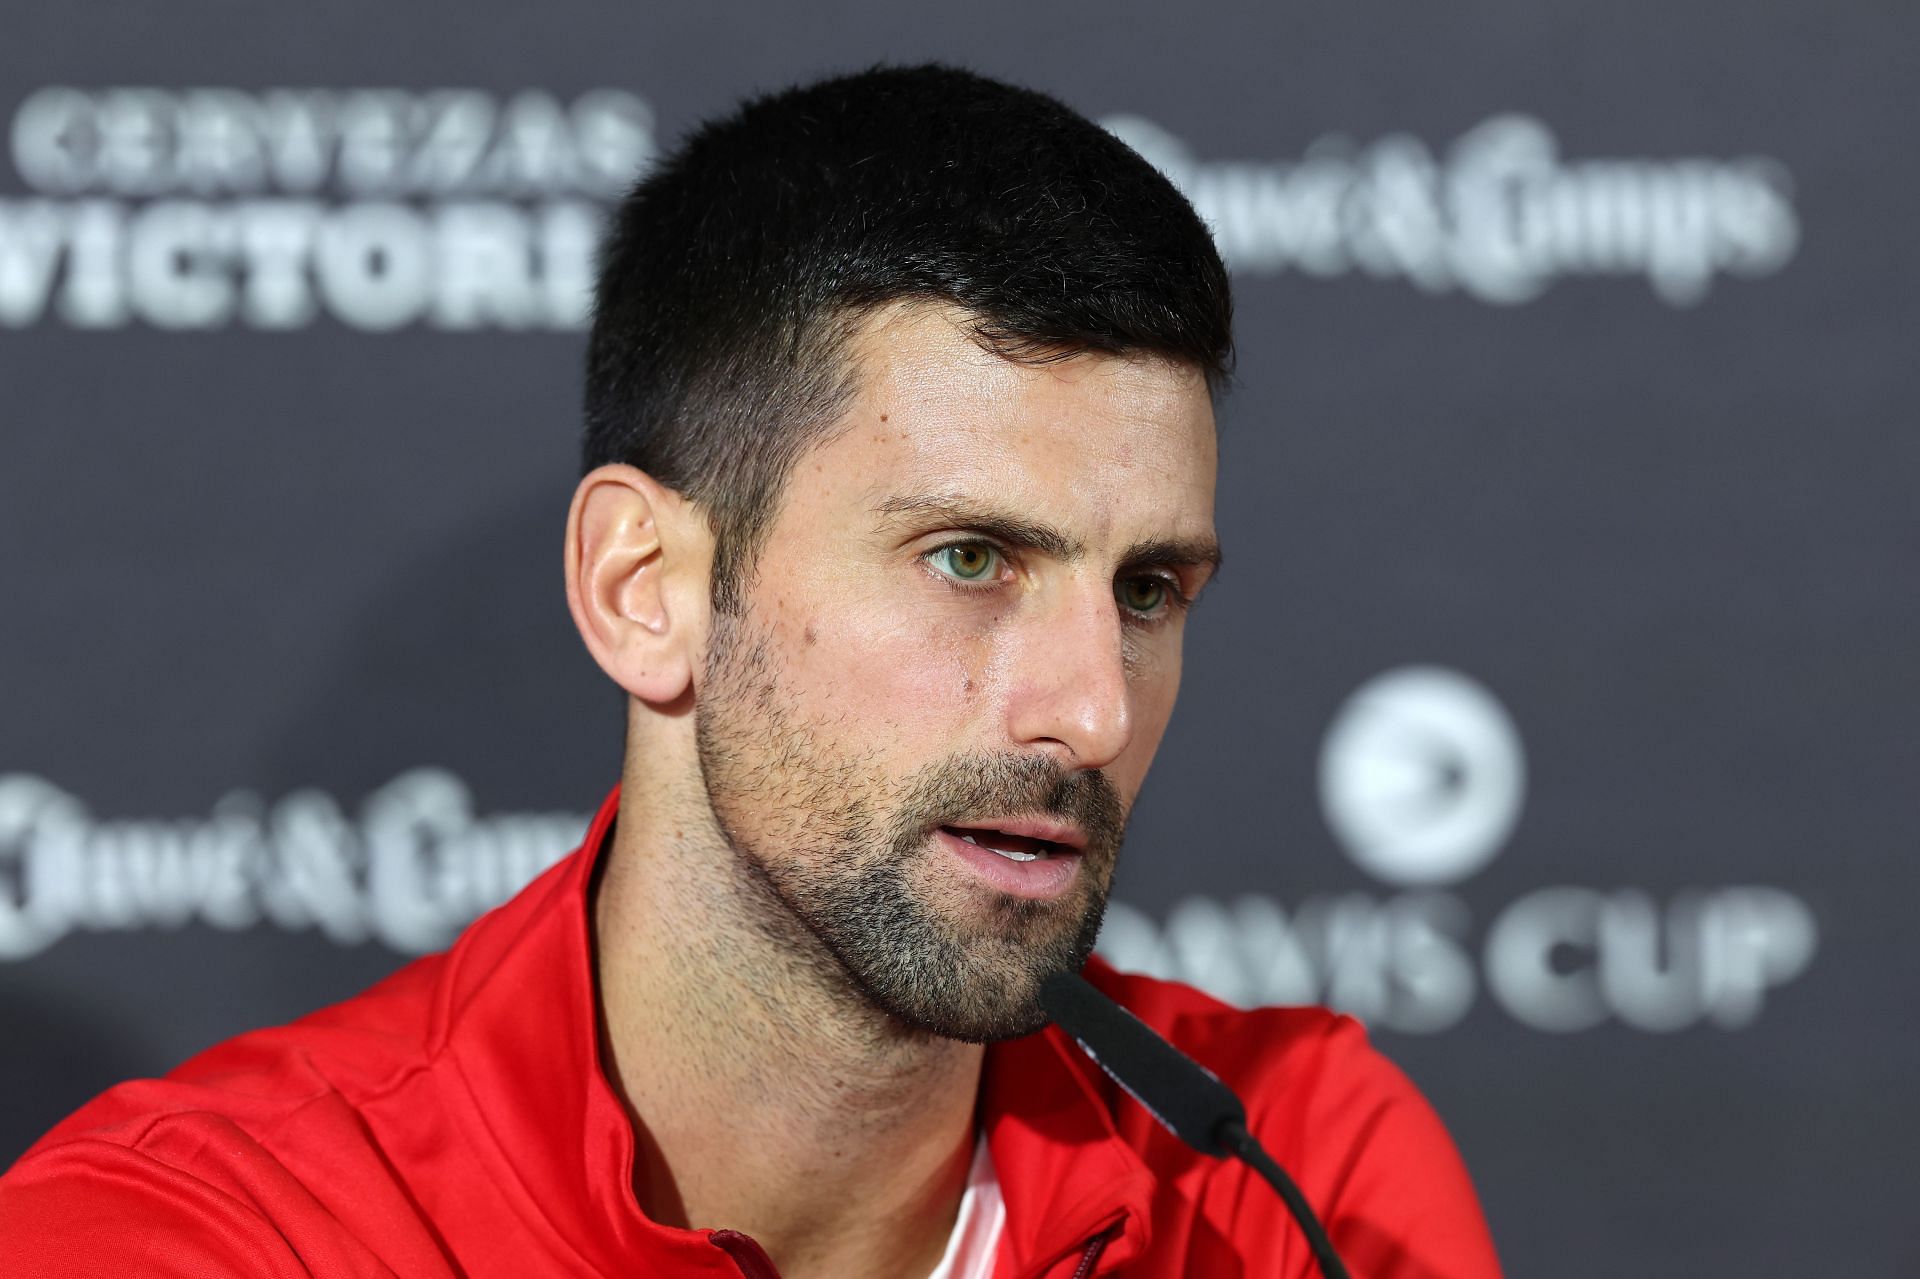 When will Novak Djokovic's latest interview with 60 Minutes air? All you need to know about the Serb's appearance on the television show